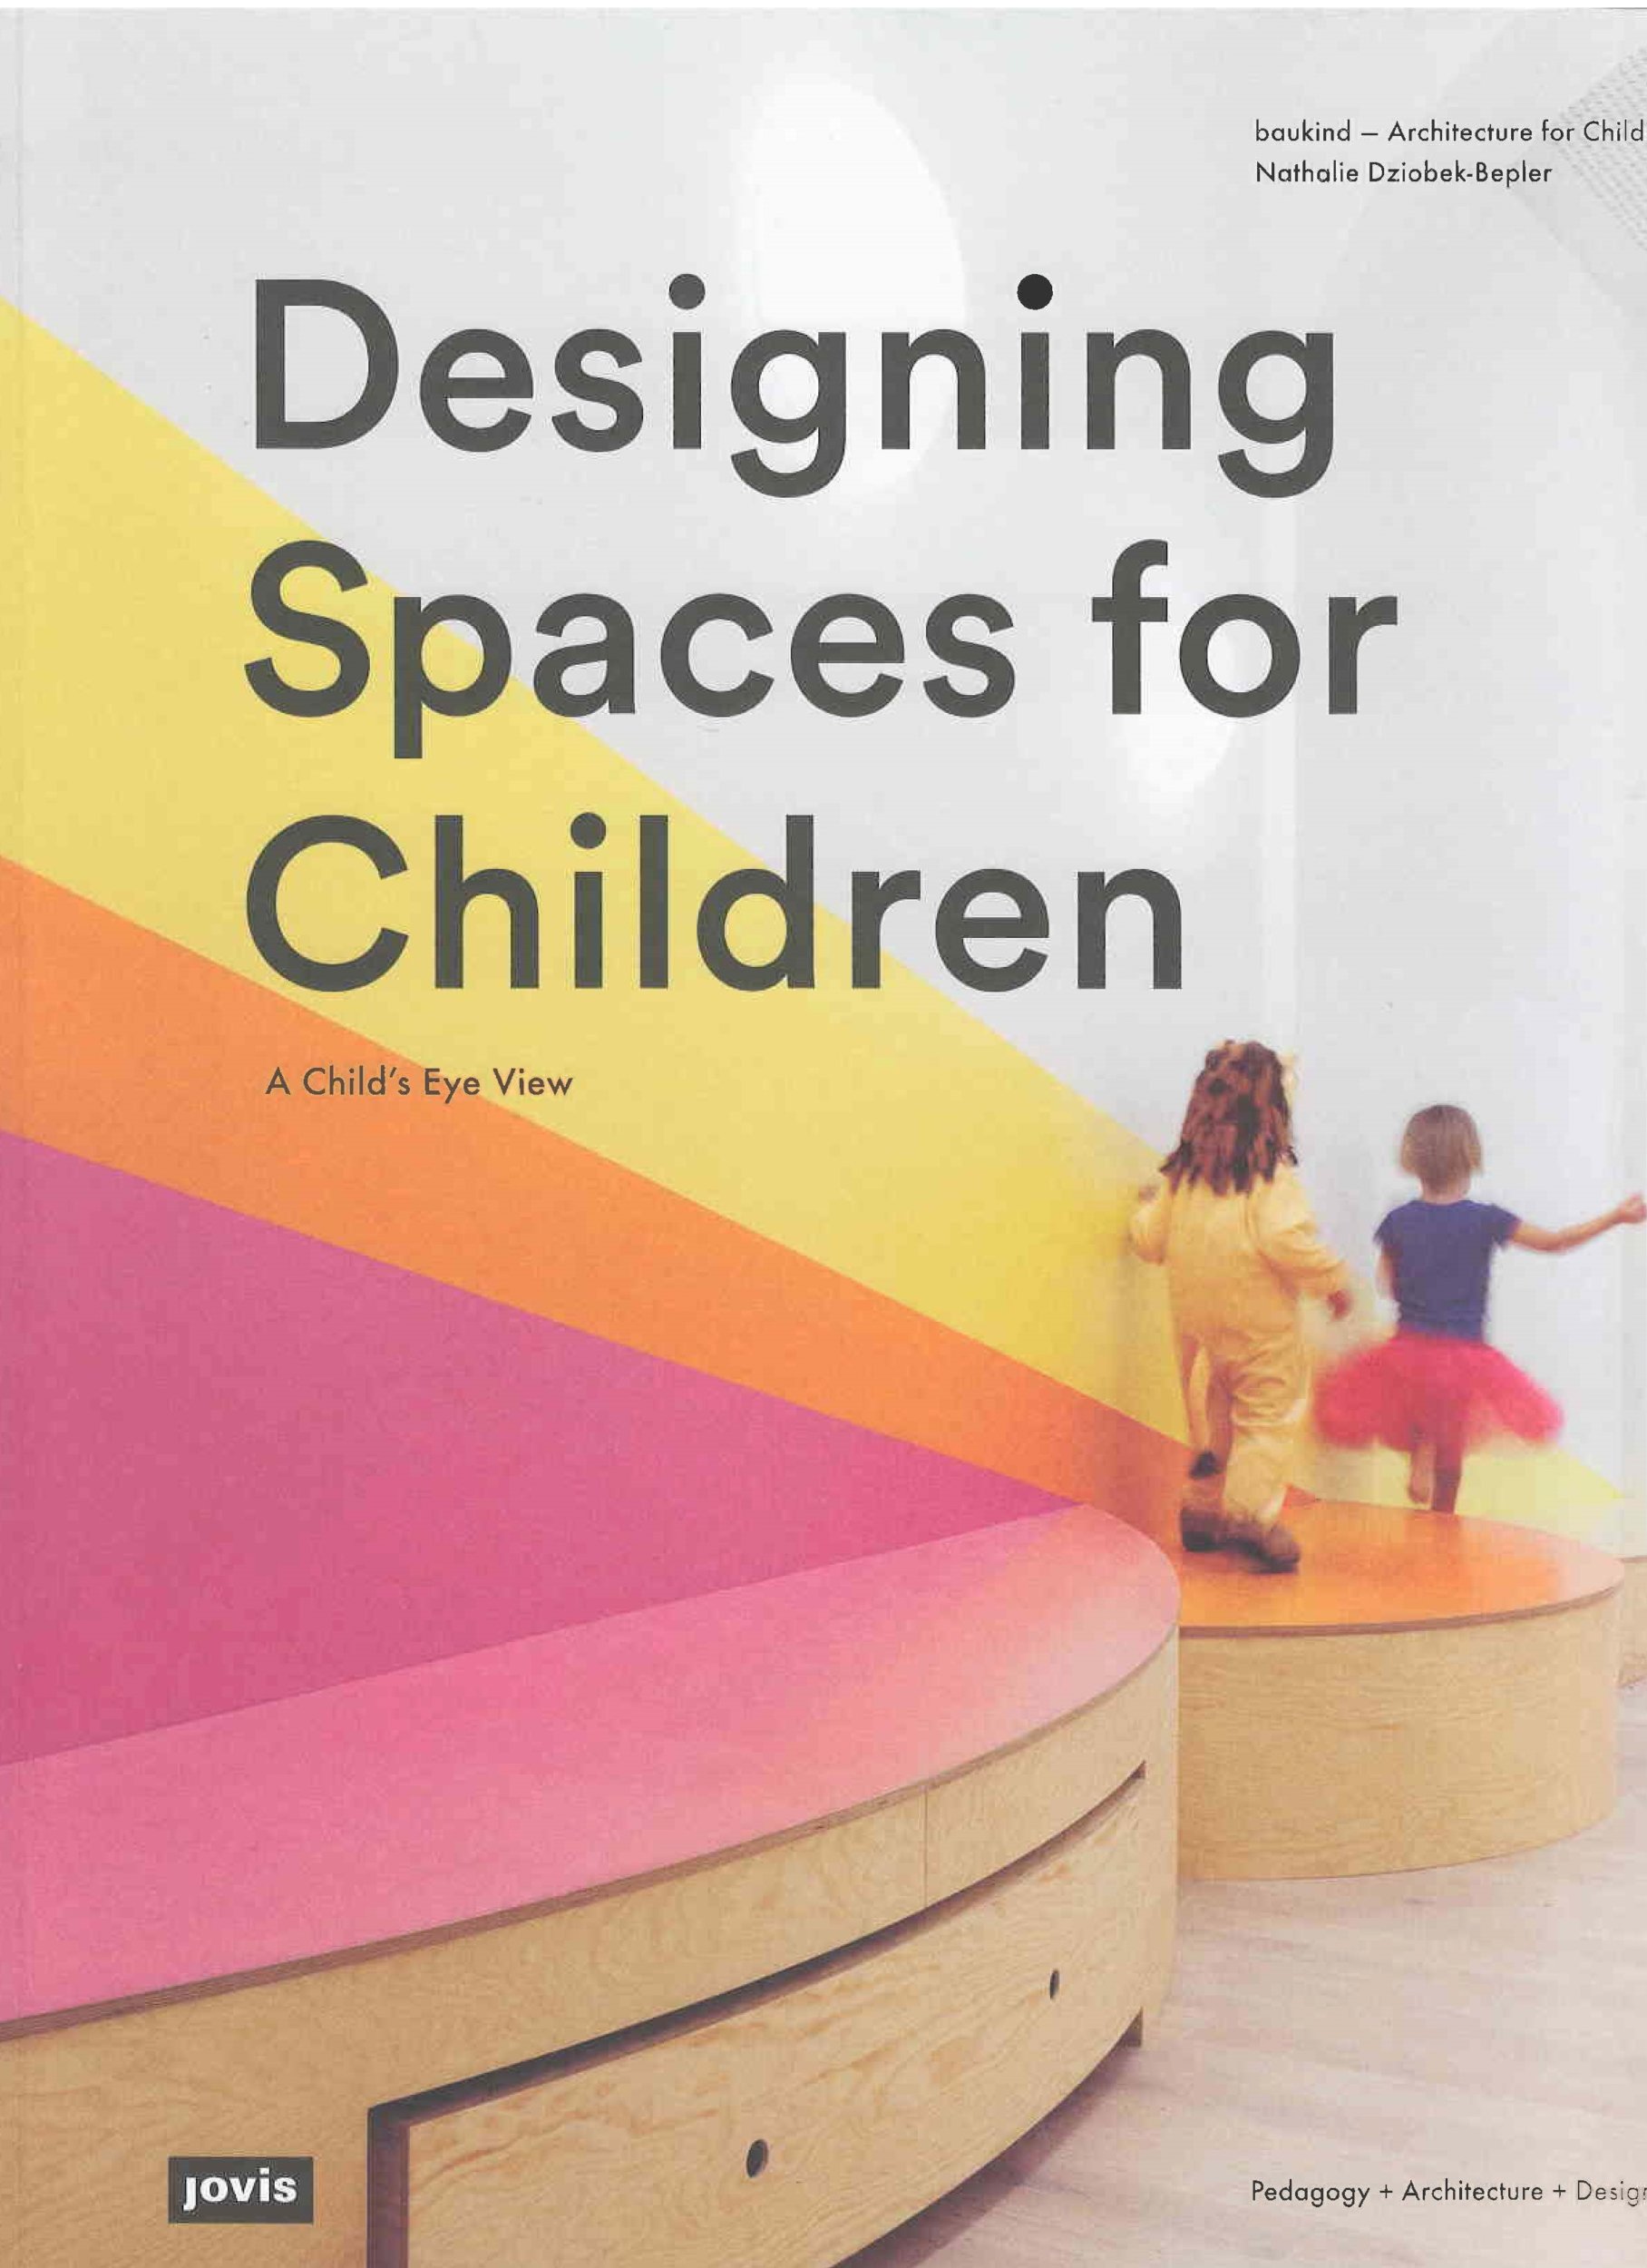 Designing spaces for children : a child's eye view